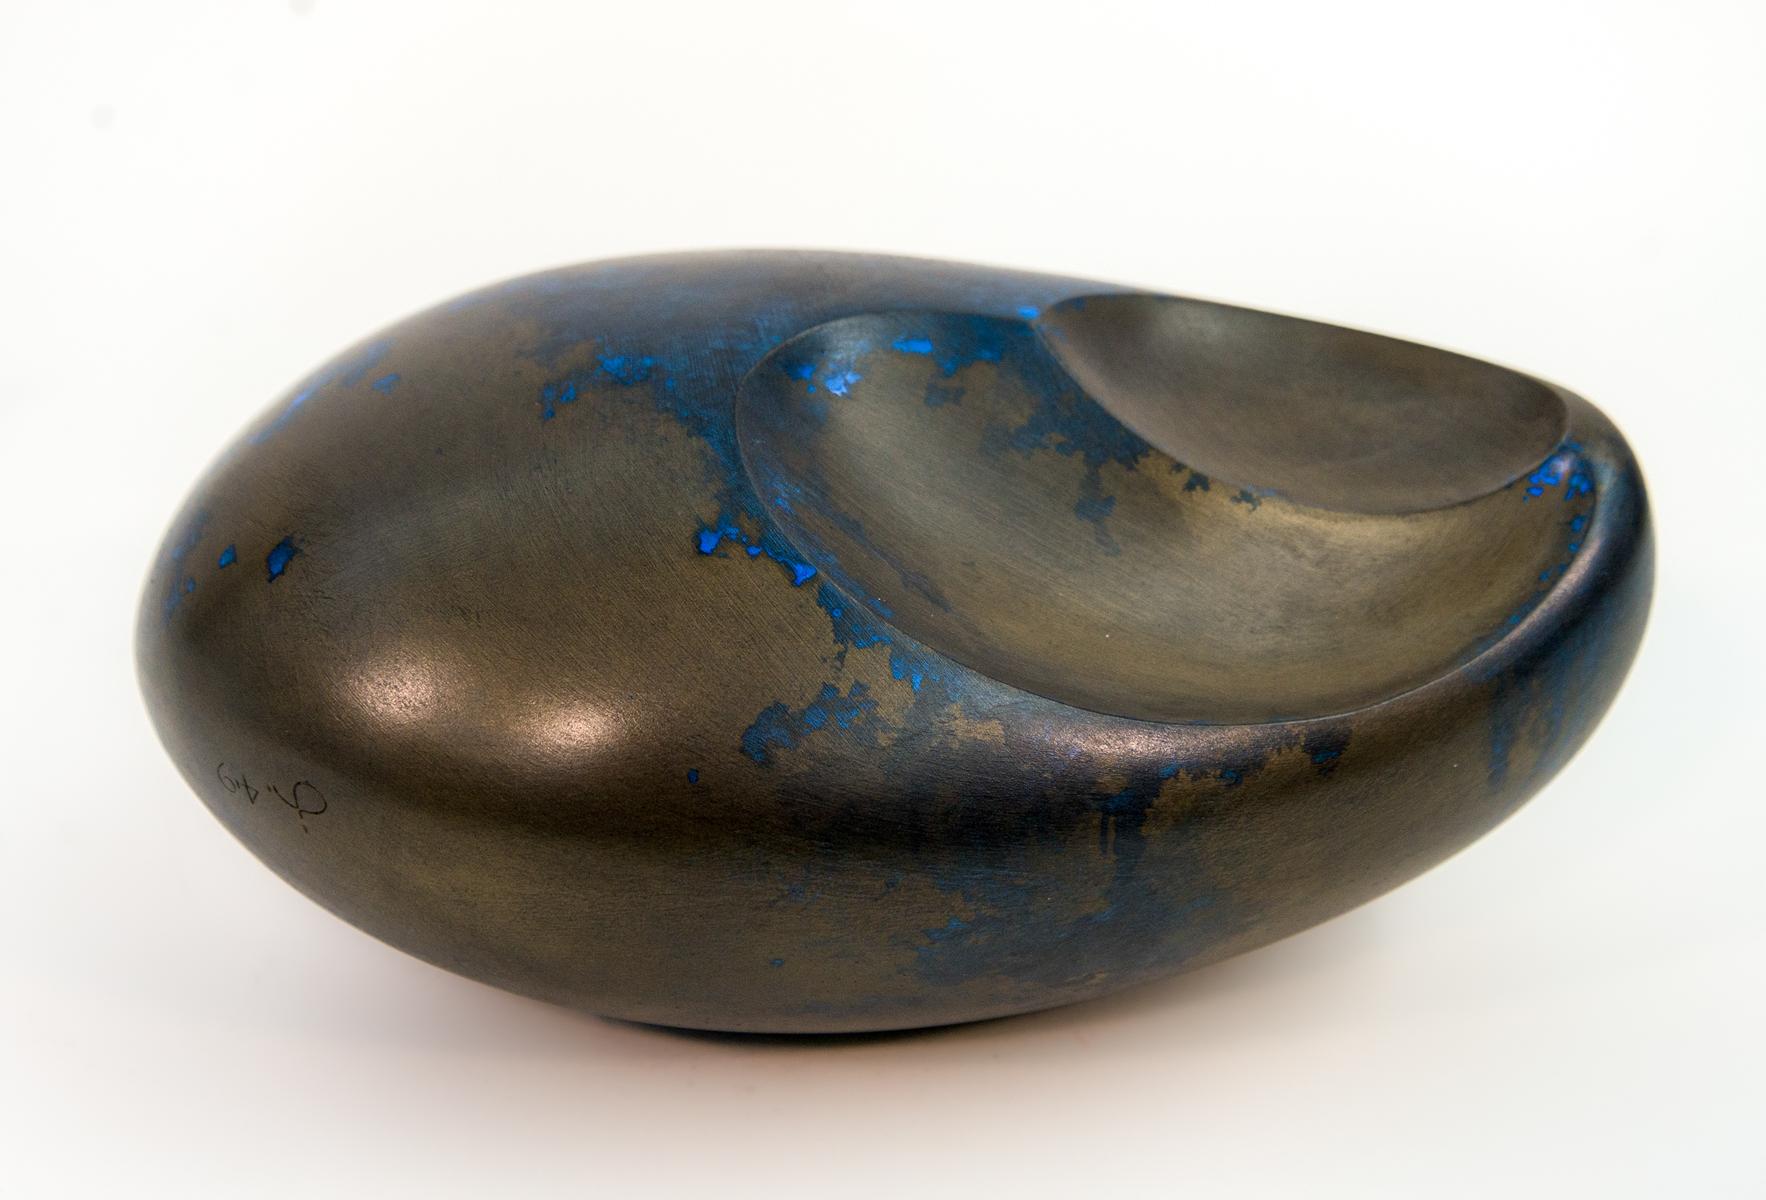 Jana Osterman Abstract Sculpture - Ovoid 4/9 - intimate, smooth, polished, cast gypsum, bronze sculpture